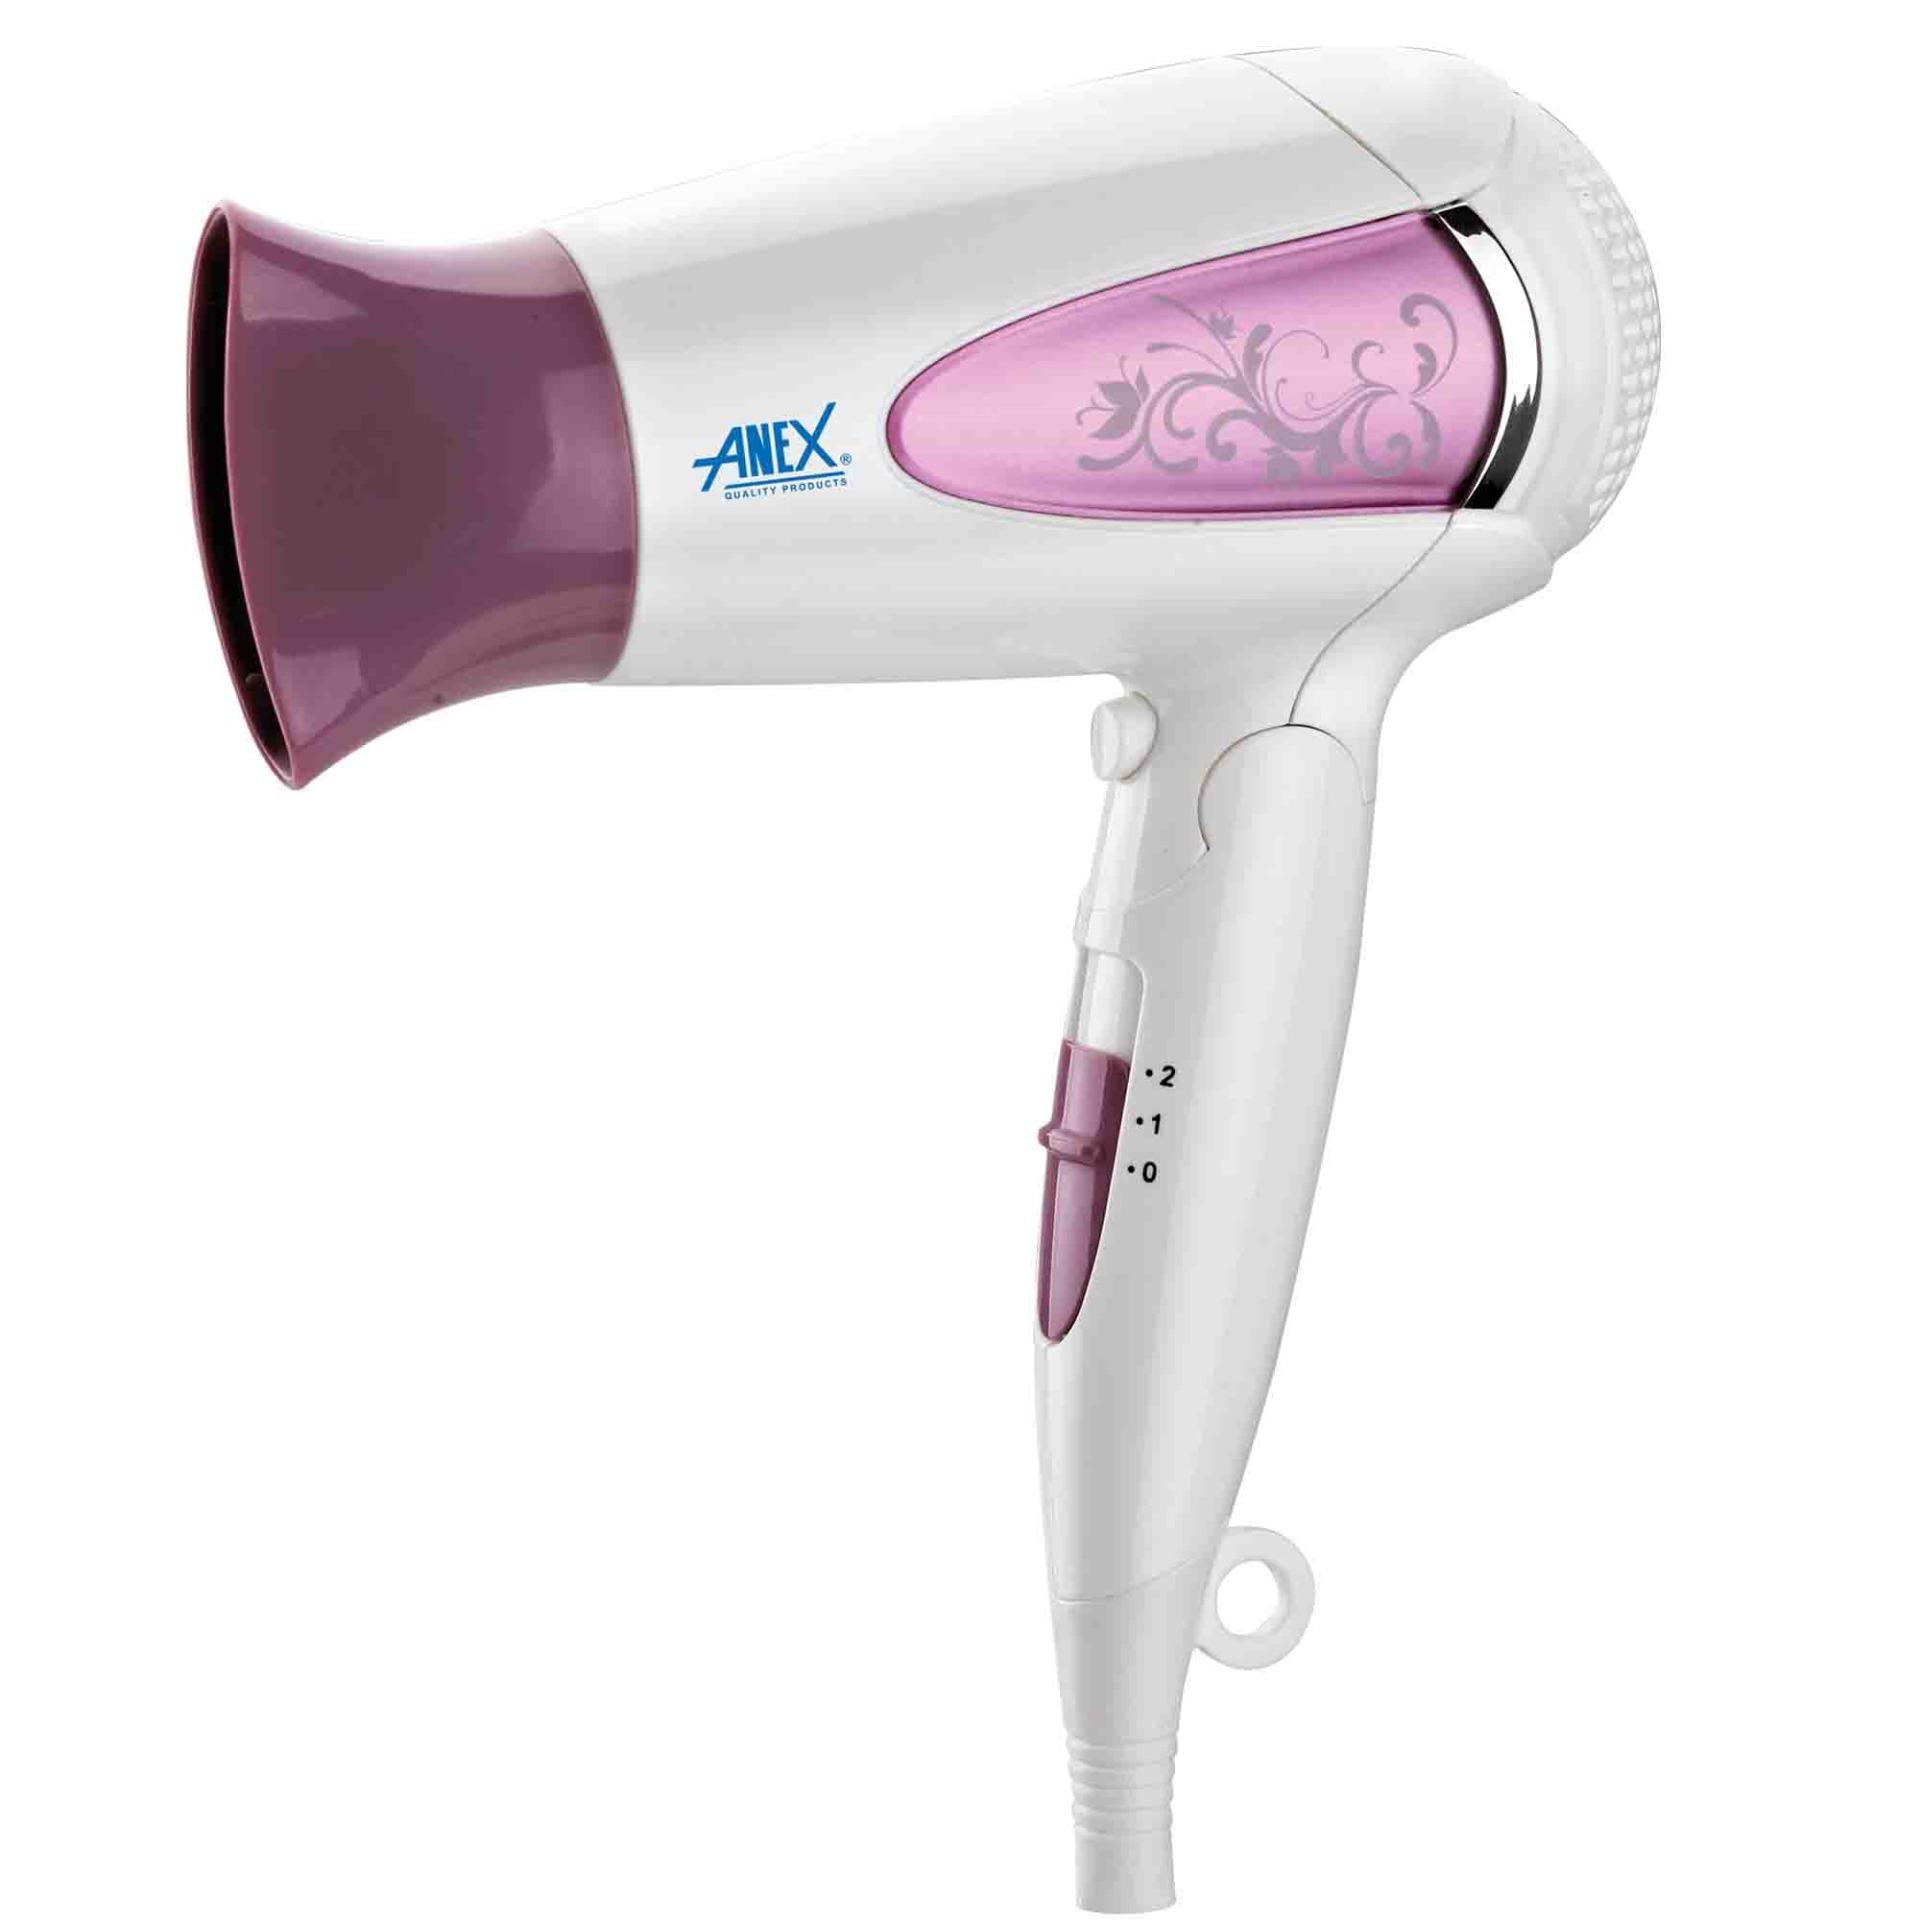 Anex AG 7003 Deluxe Hair Dryer